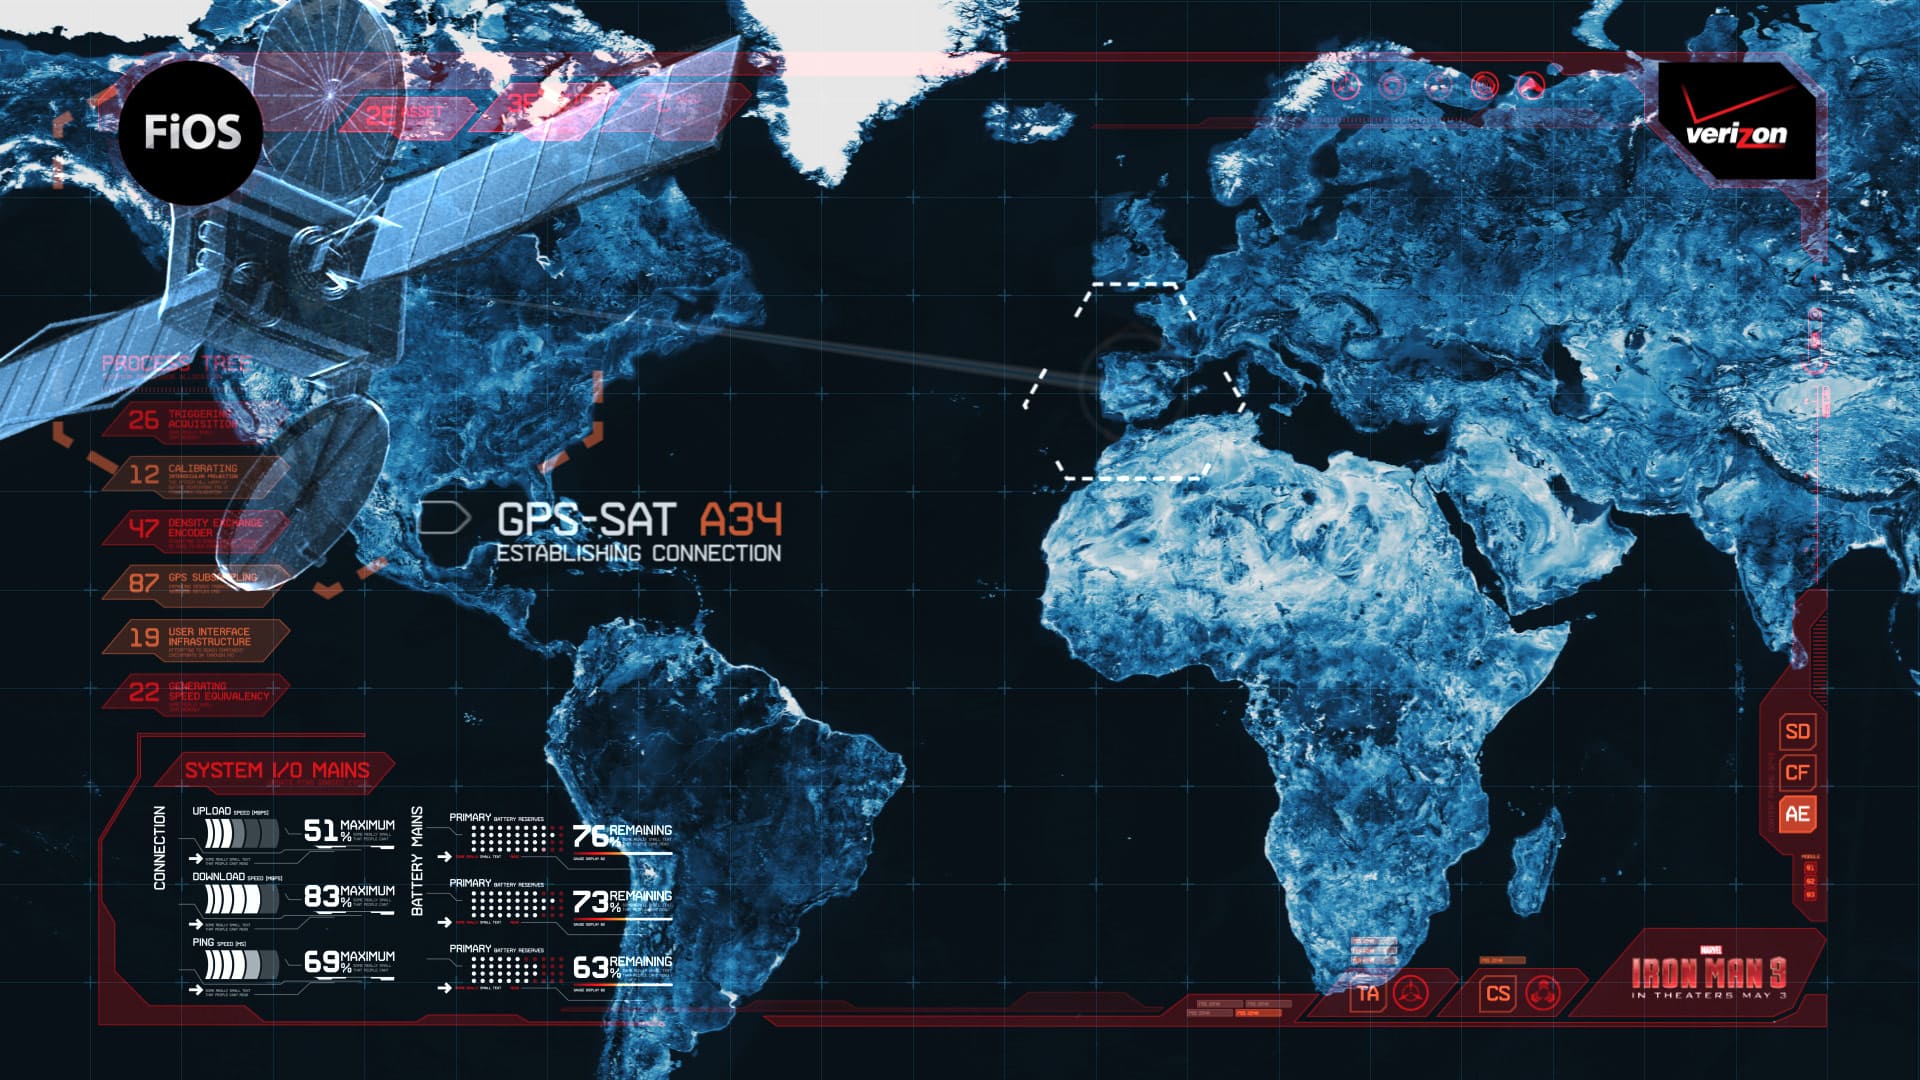 Futuristic UI motion graphics in a animated commercial